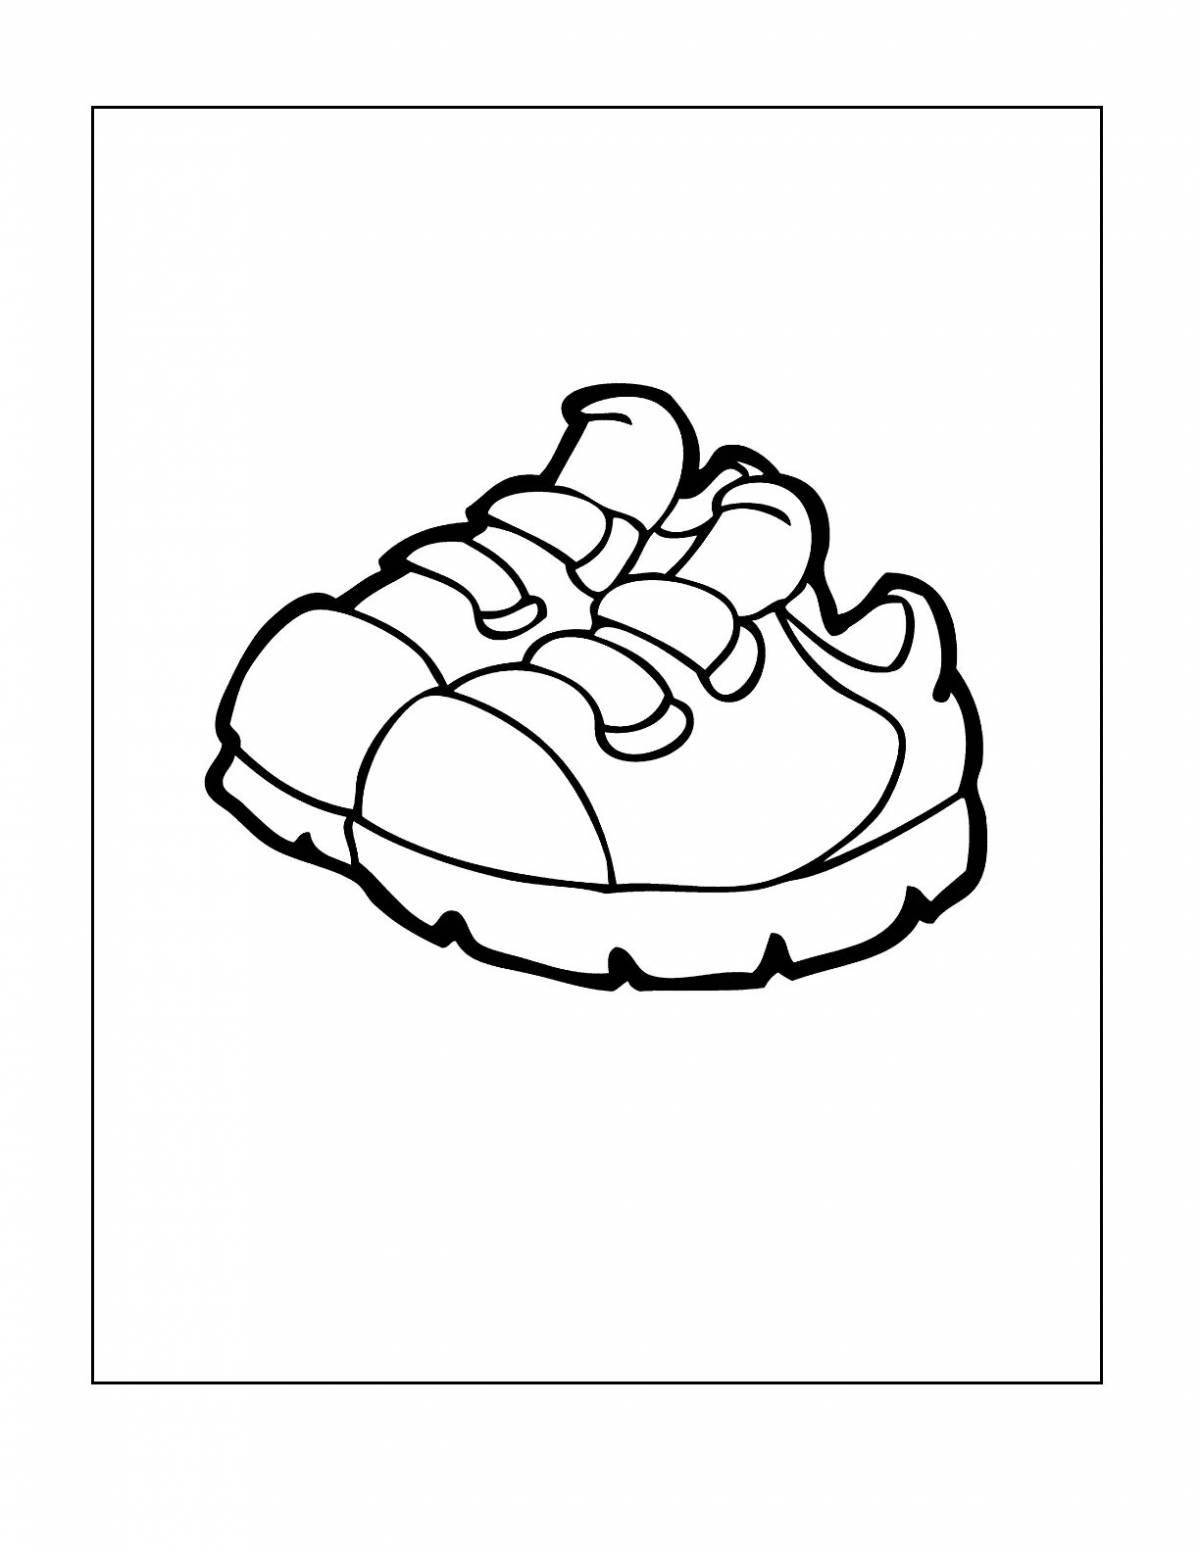 A fun shoe coloring book for 2-3 year olds